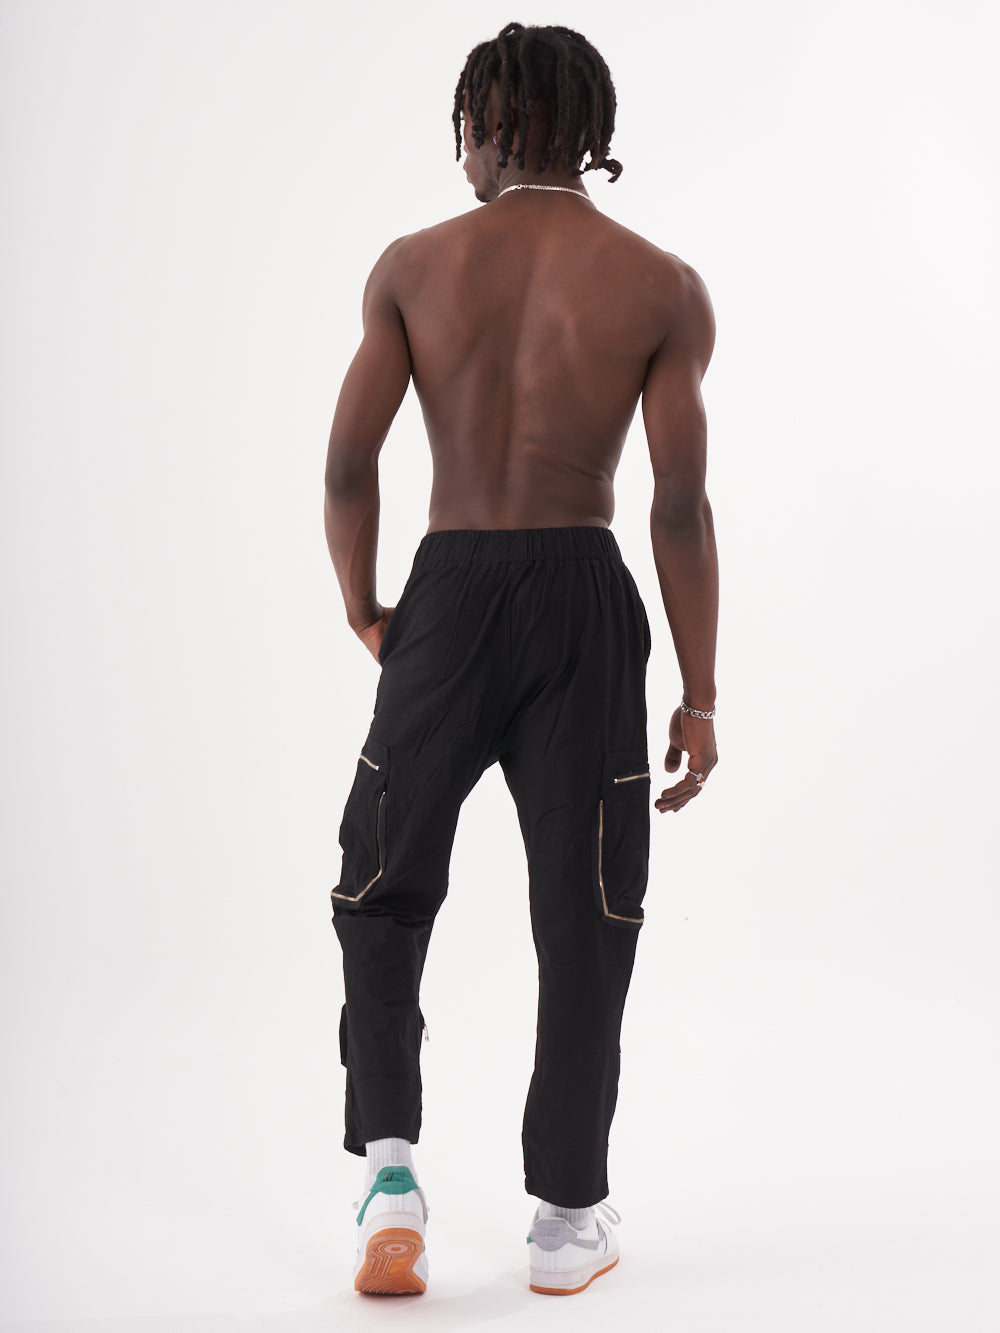 The back view of a man wearing Raider Joggers.